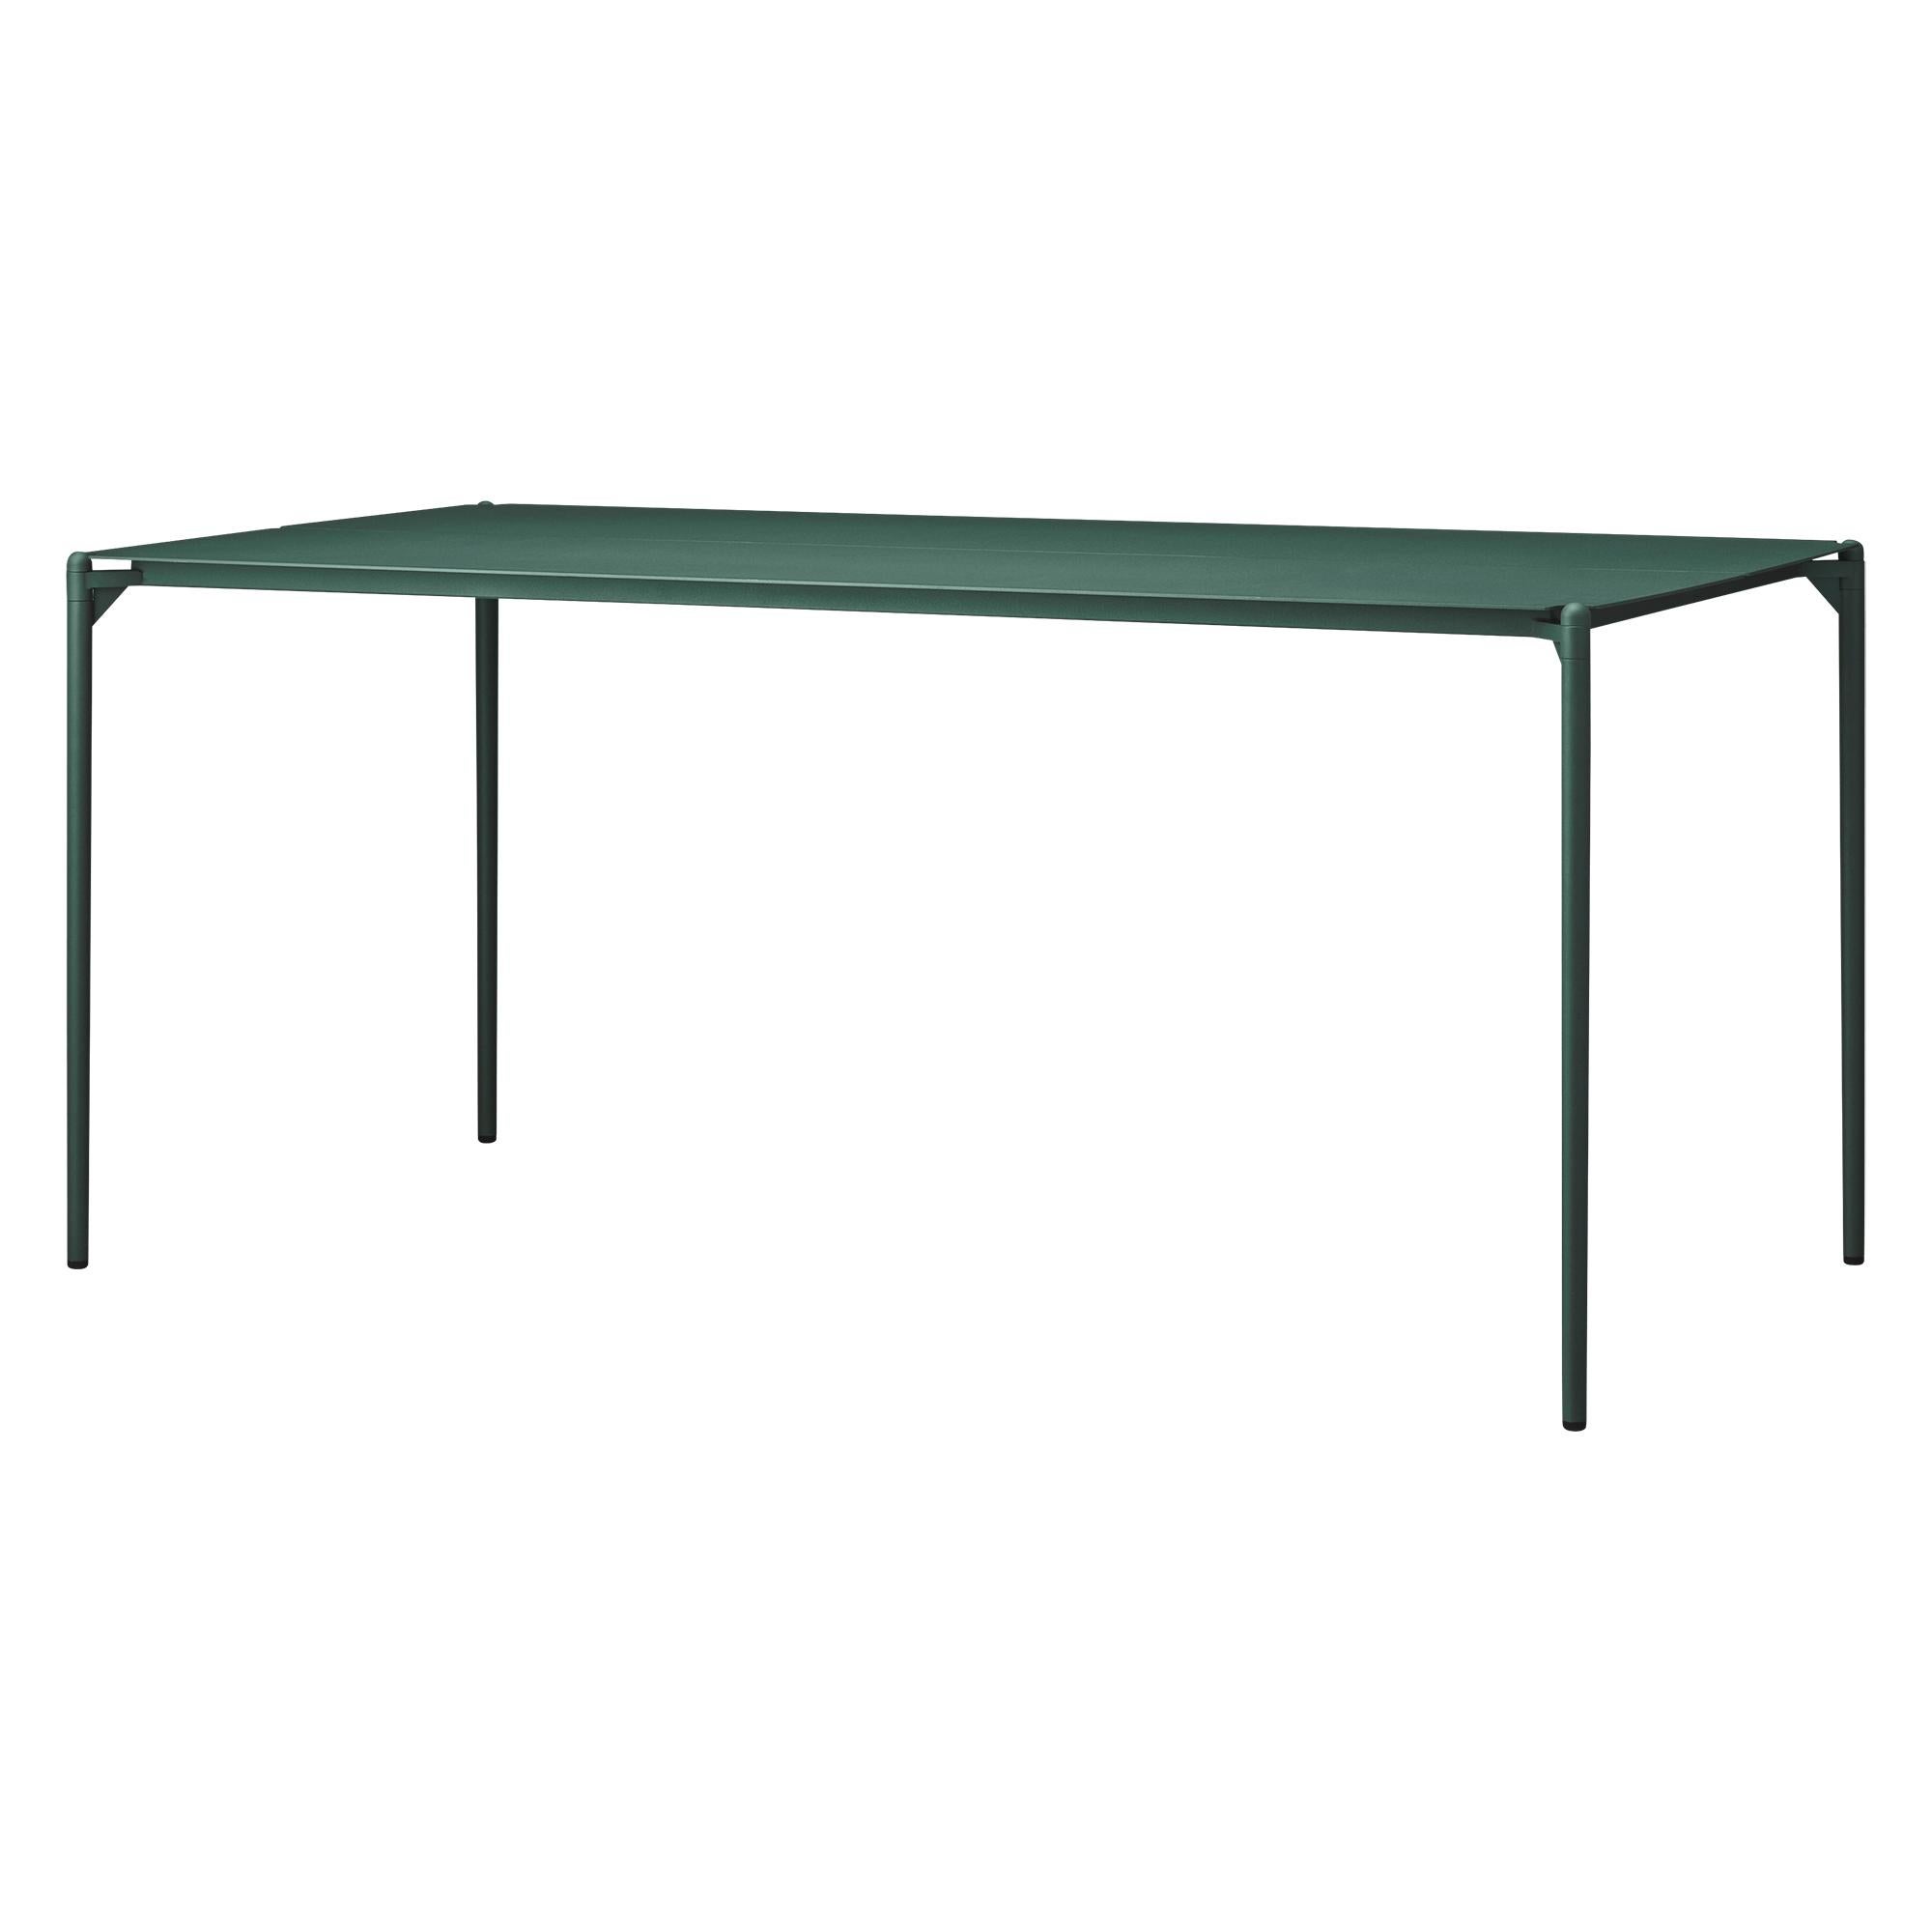 Medium forest Minimalist table
Dimensions: D 160 x W 80 x H 72 cm 
Materials: Steel w. Matte powder coating & aluminum w. Matte powder coating.
Available in colors: Taupe, bordeaux, forest, ginger bread, black and, black and gold.


Bring